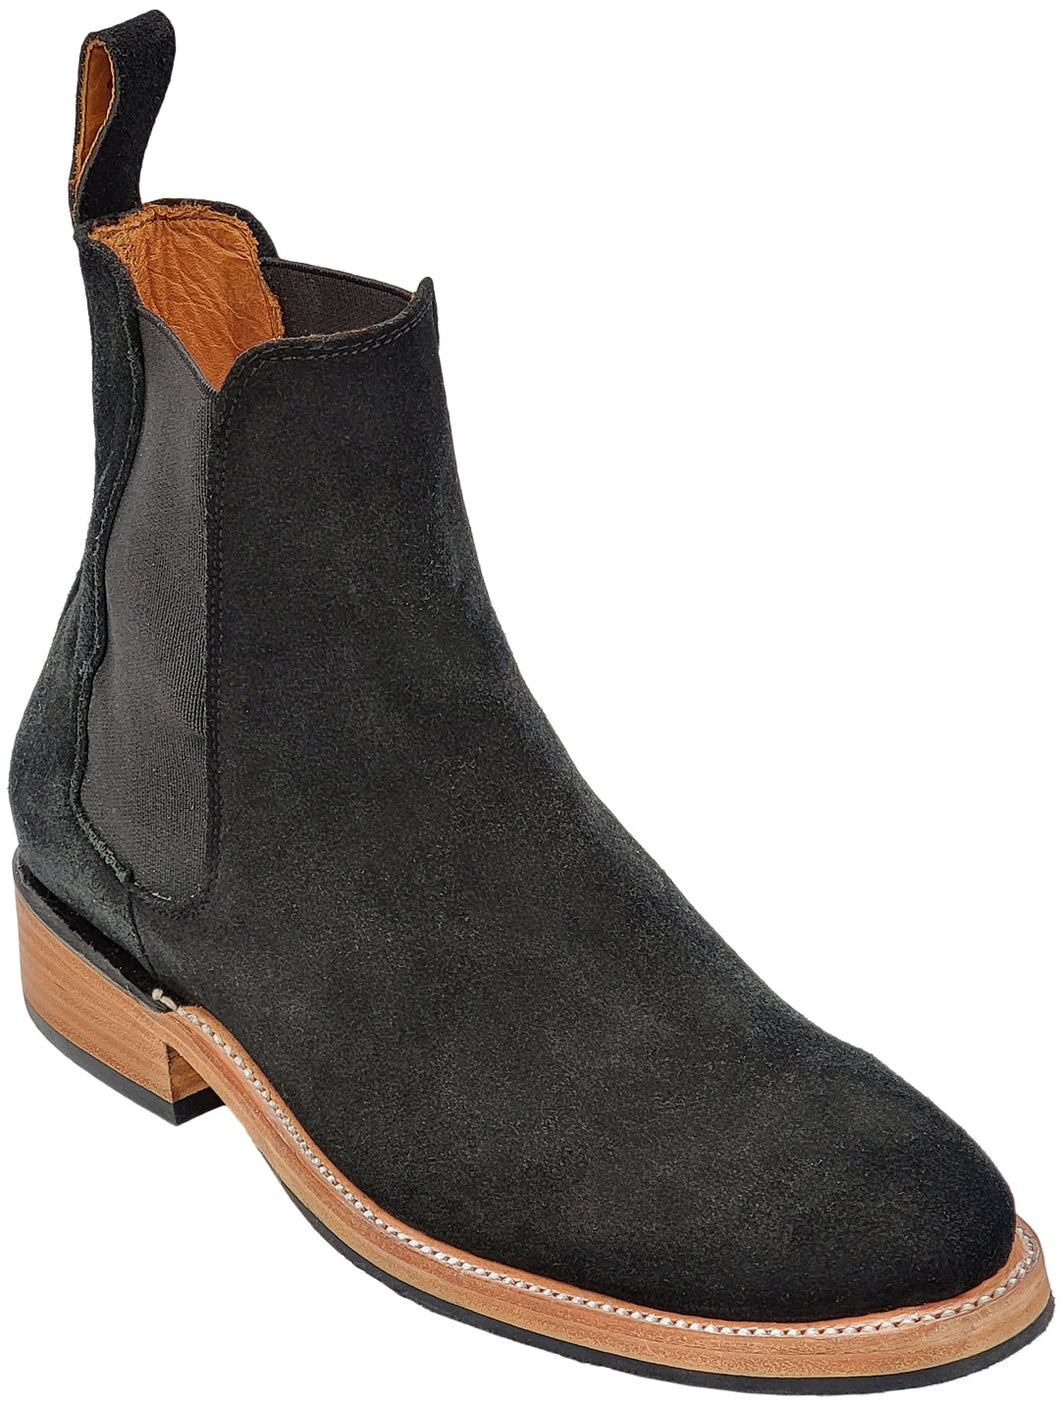 Silverton The Ambassador All Leather Round Toe Short Boots (Black)